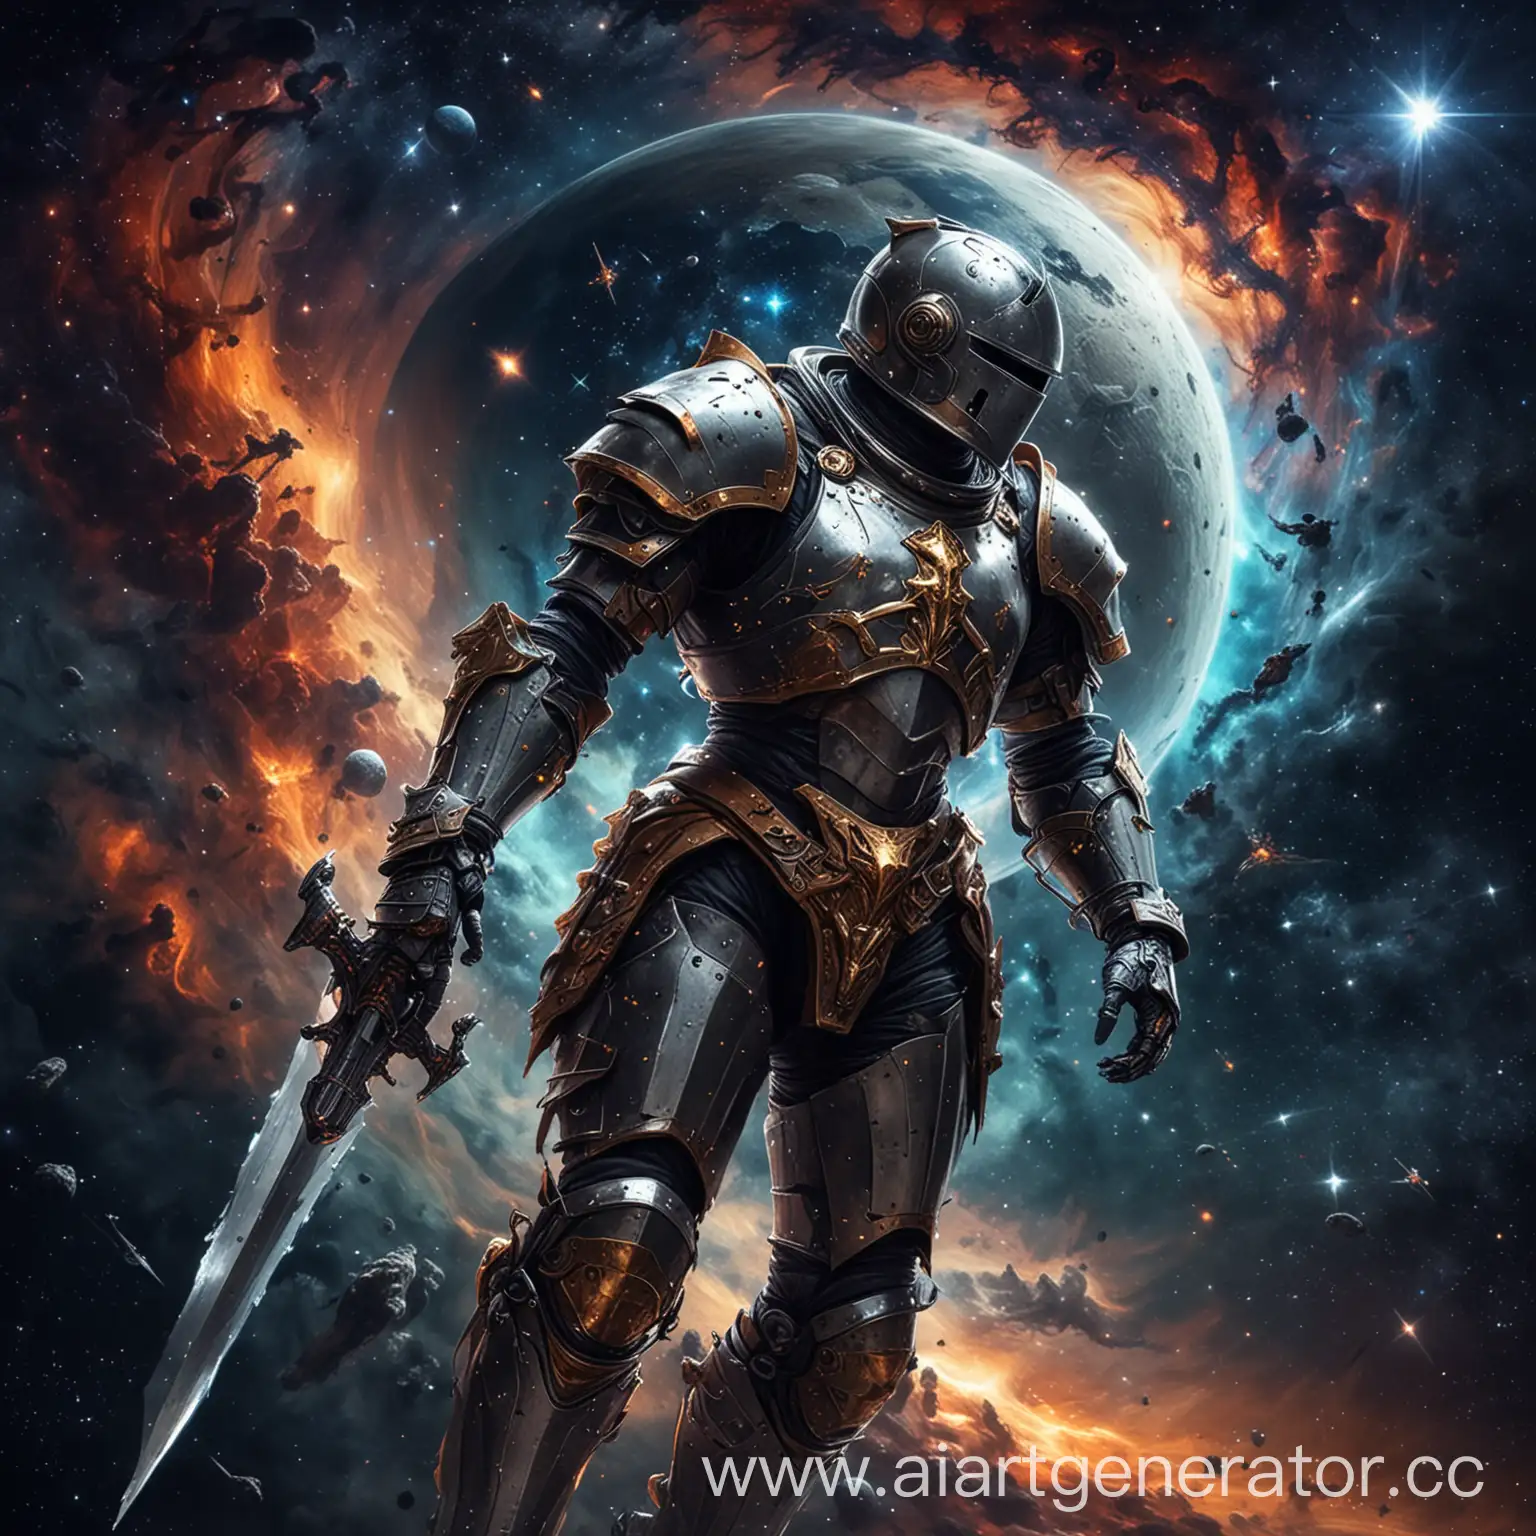 Galactic-Knight-Exploration-Astronaut-Knight-in-Deep-Space